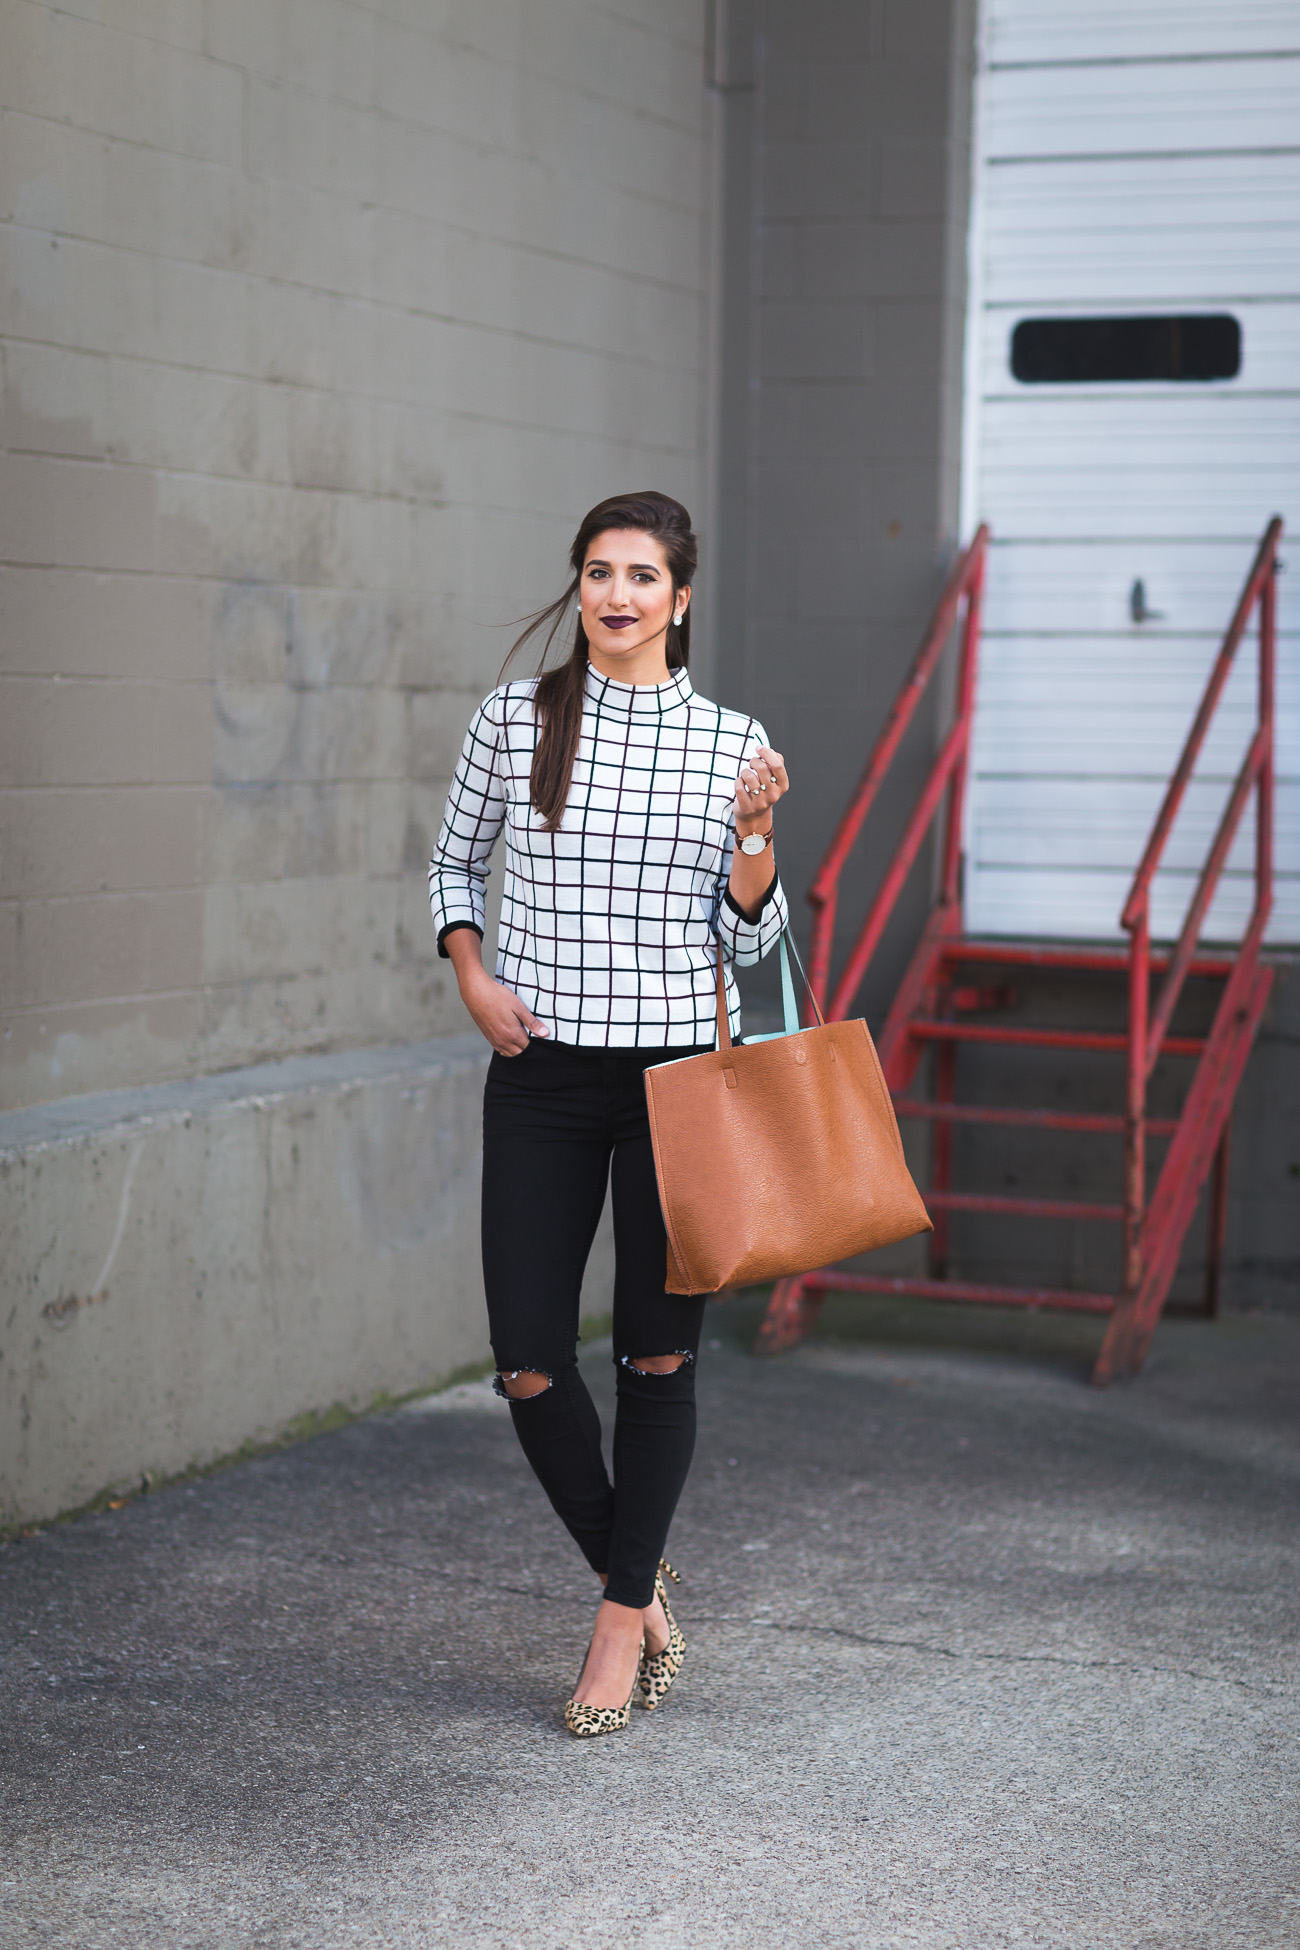 cute fall outfit, fall outfit ideas, fall fashion, fall style, windowpane print, windowpane sweater, nordstrom sweater, halogen sweater, dark lipstick, calf hair pumps, leopard pumps, distressed skinny jeans, vegan tote, fall outfit ideas // grace wainwright from a southern drawl